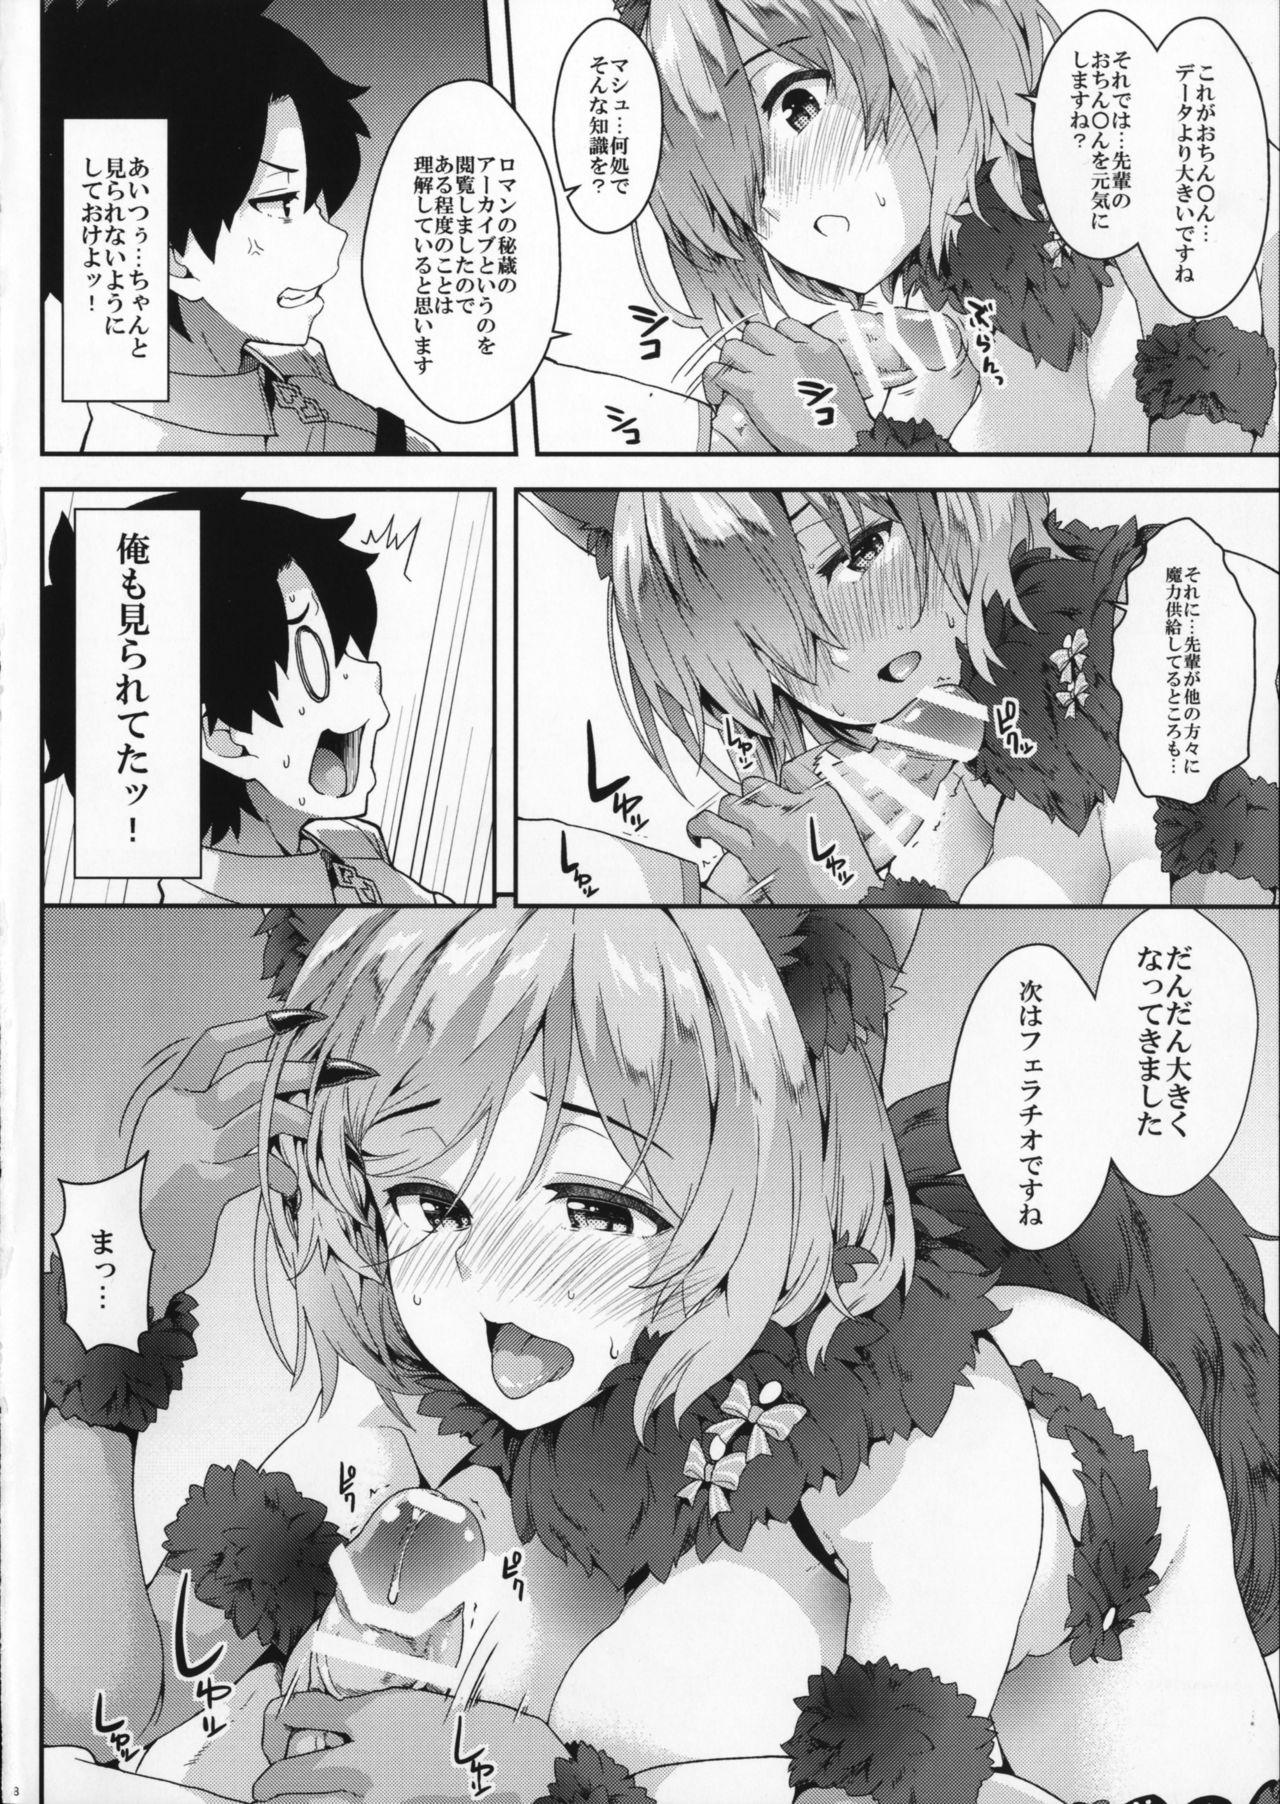 Amador Why am I jealous of you? - Fate grand order Straight - Page 7